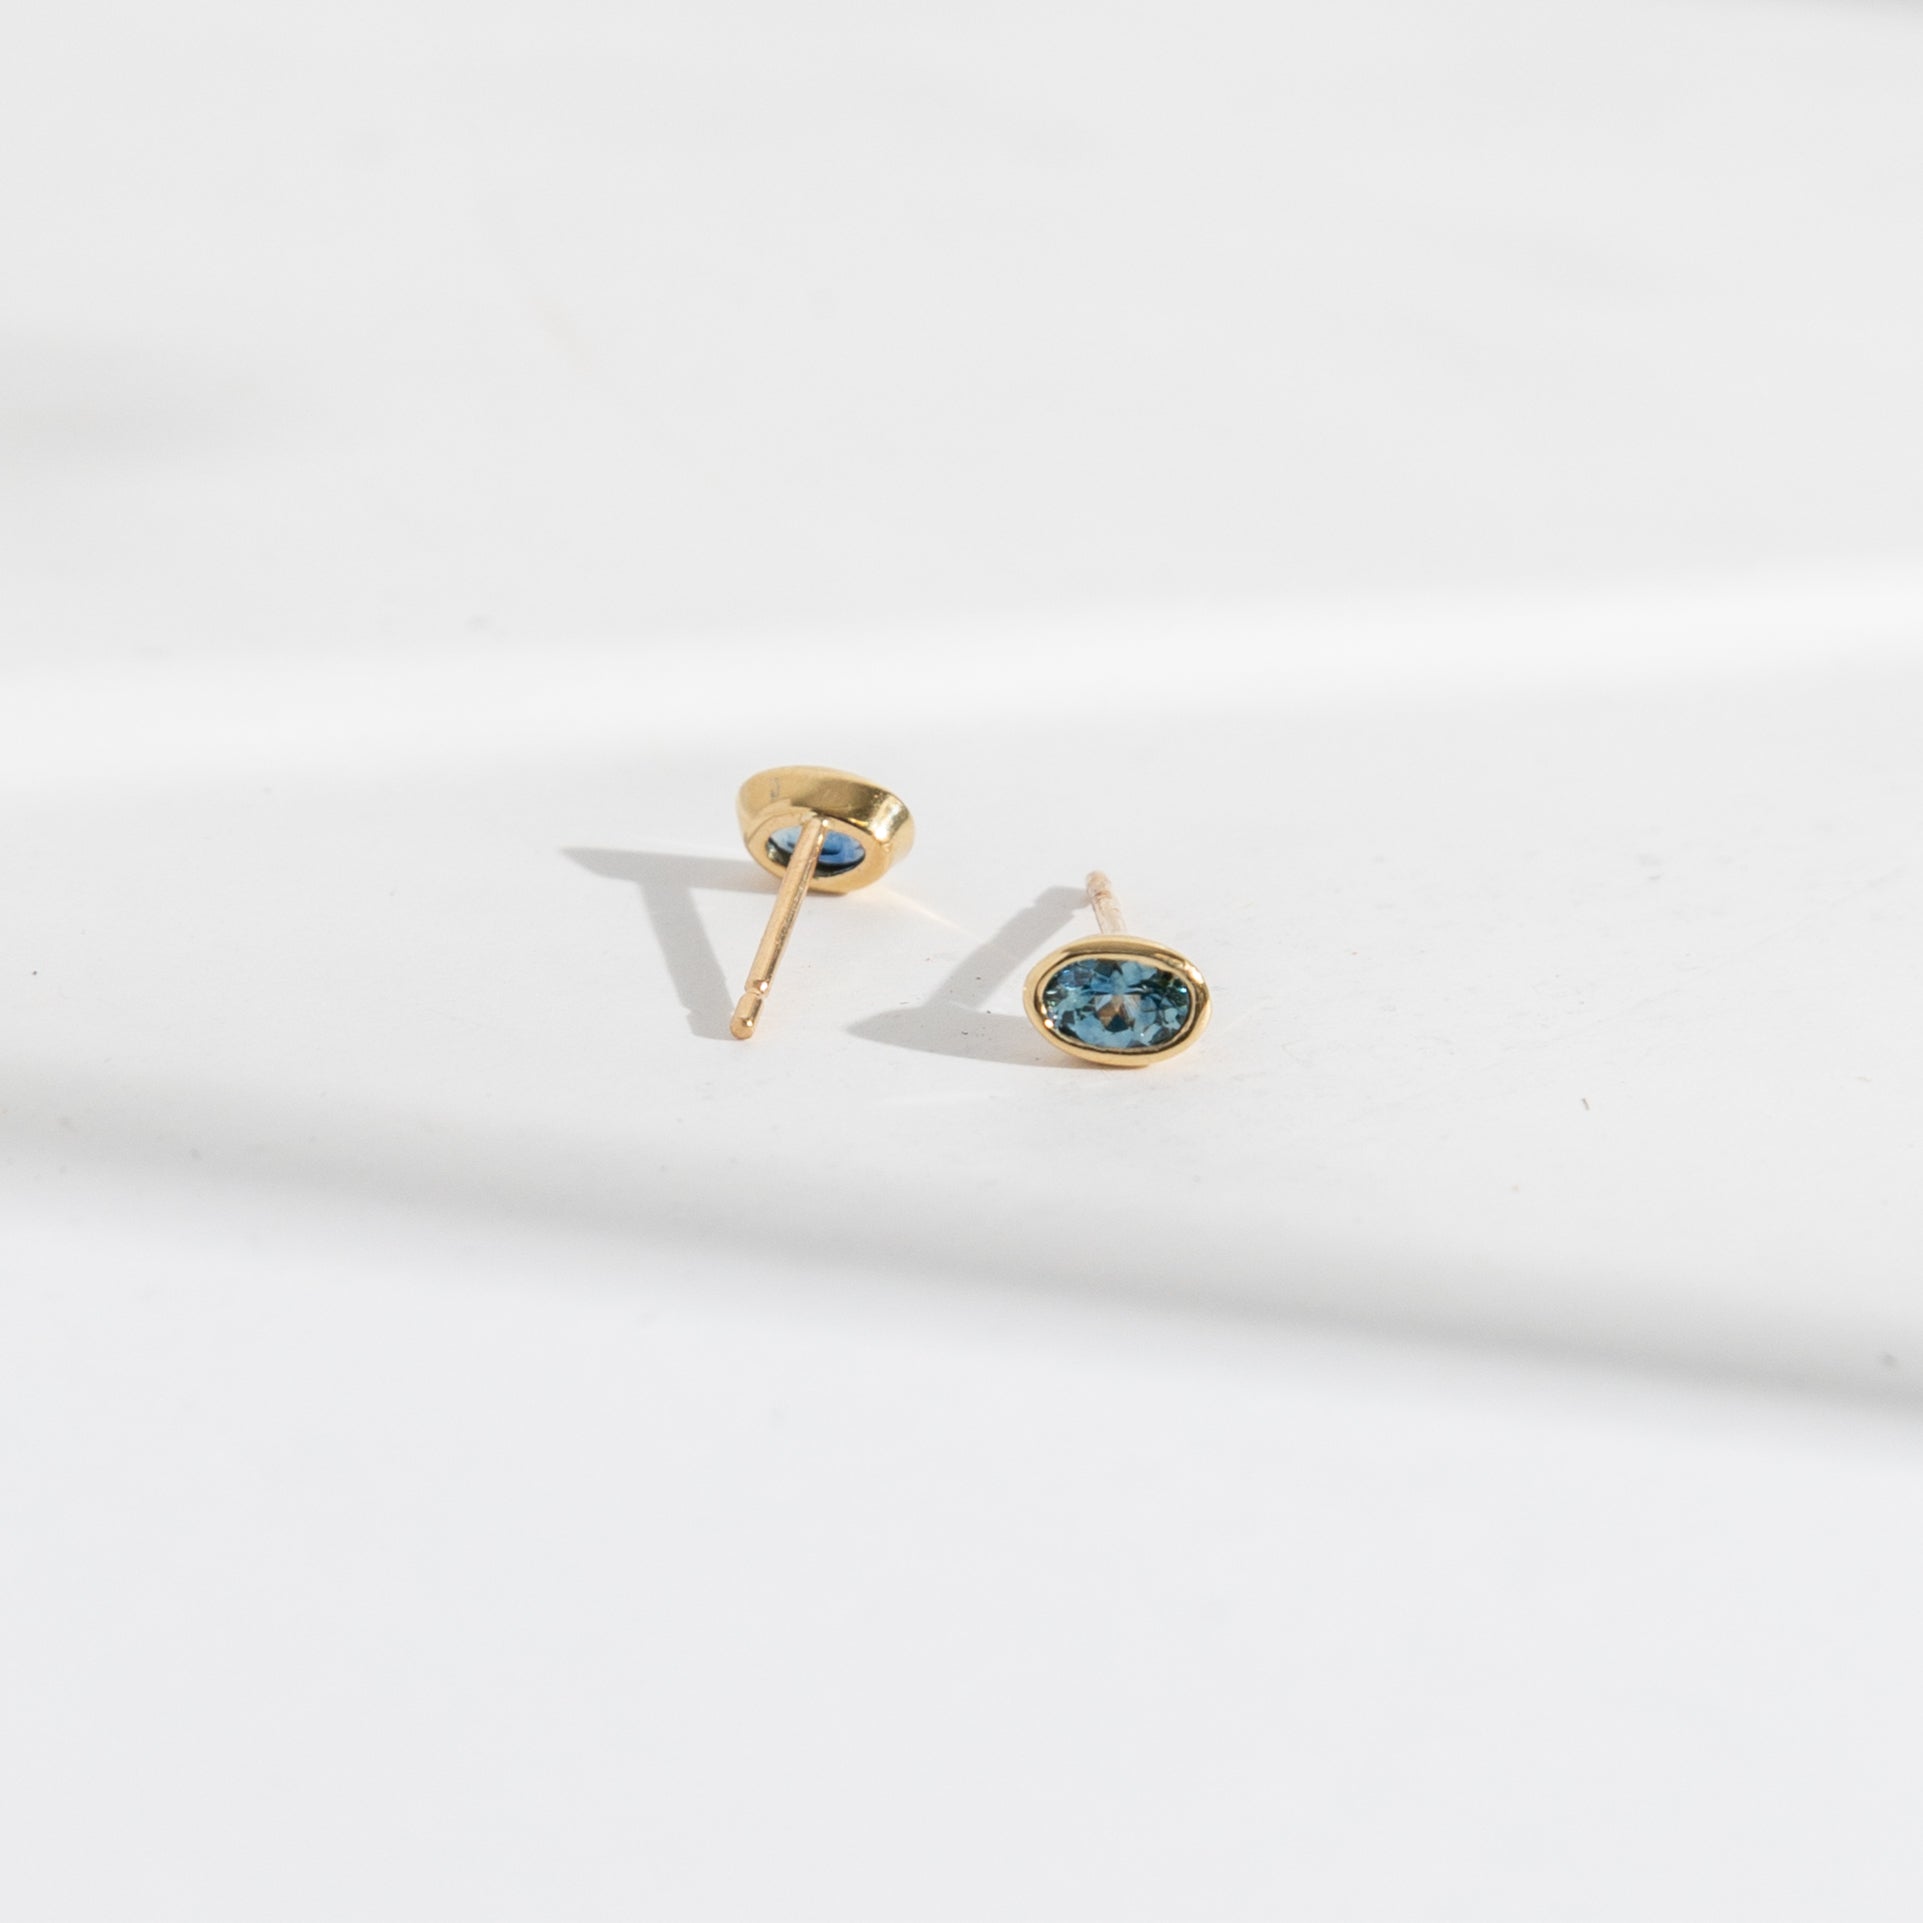 Ana Minimal Earrings 14k Yellow Gold Set With Blue Sapphires By SHW Fine Jewelry New York City